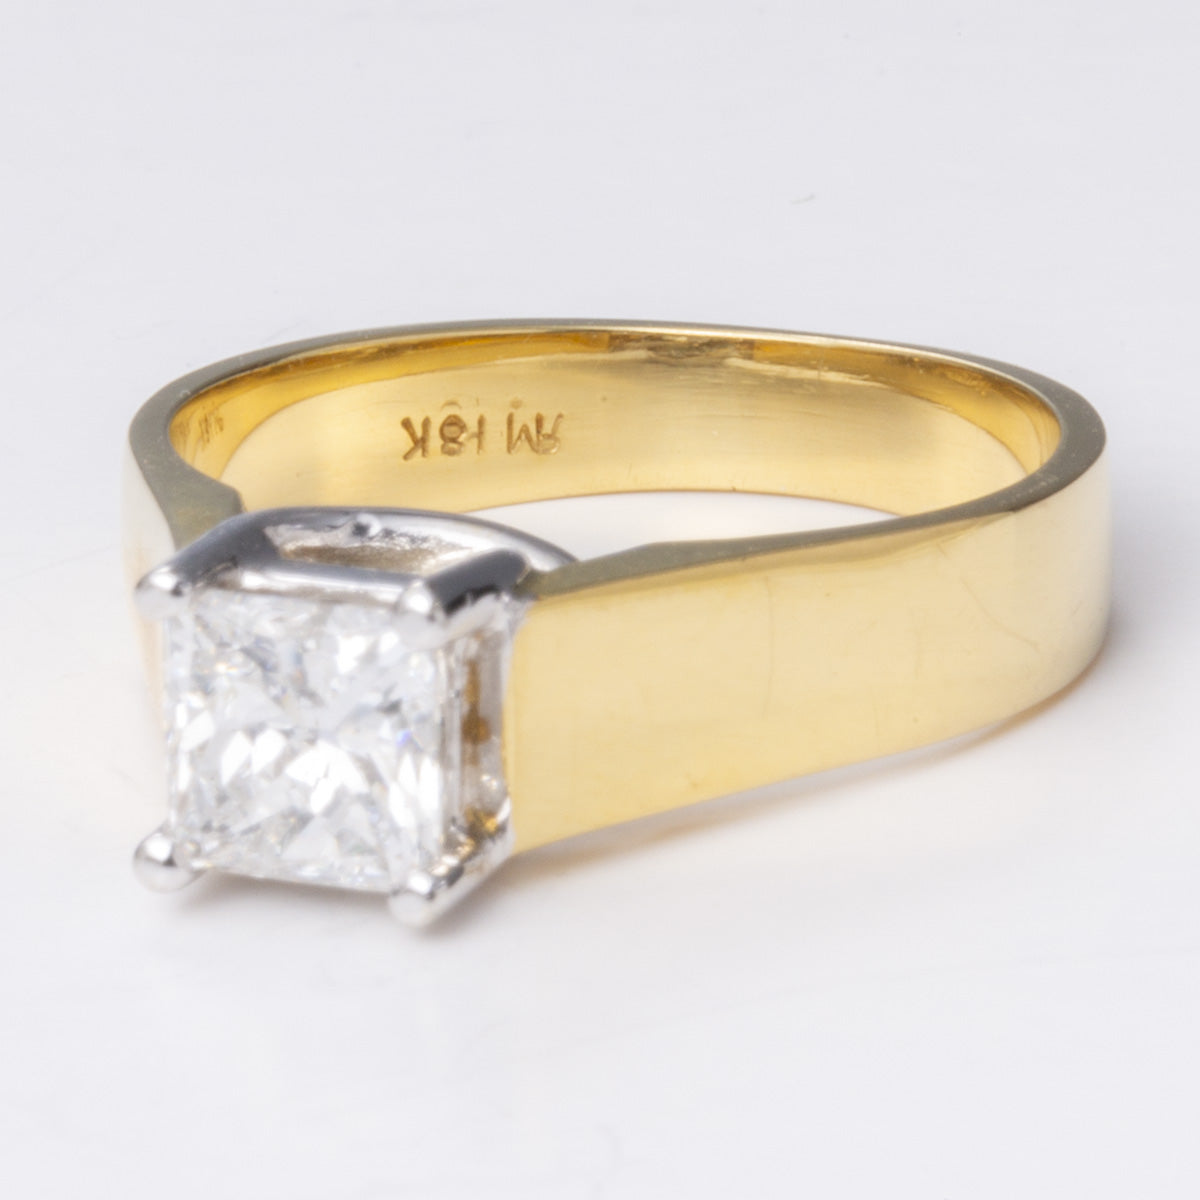 Princess Cut Solitaire Yellow and White 18k Ring | 0.97 ct | SZ 6.25